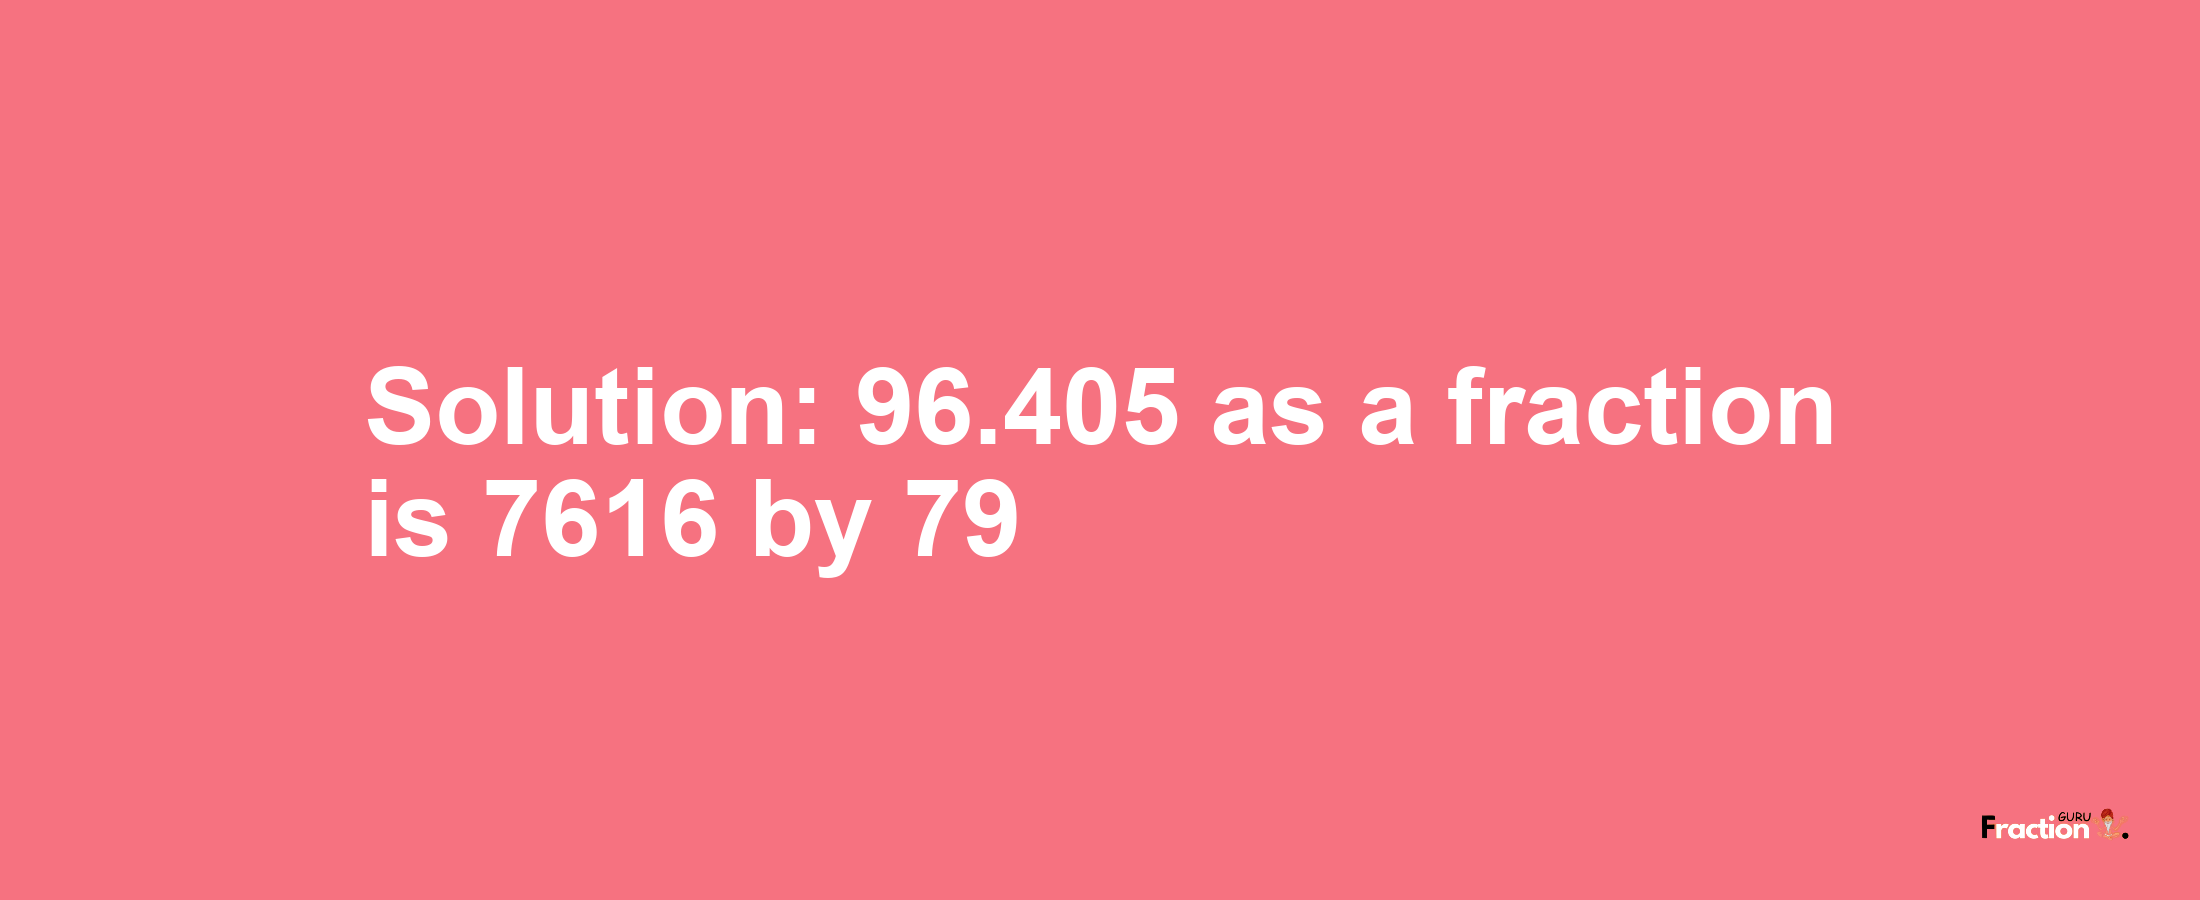 Solution:96.405 as a fraction is 7616/79